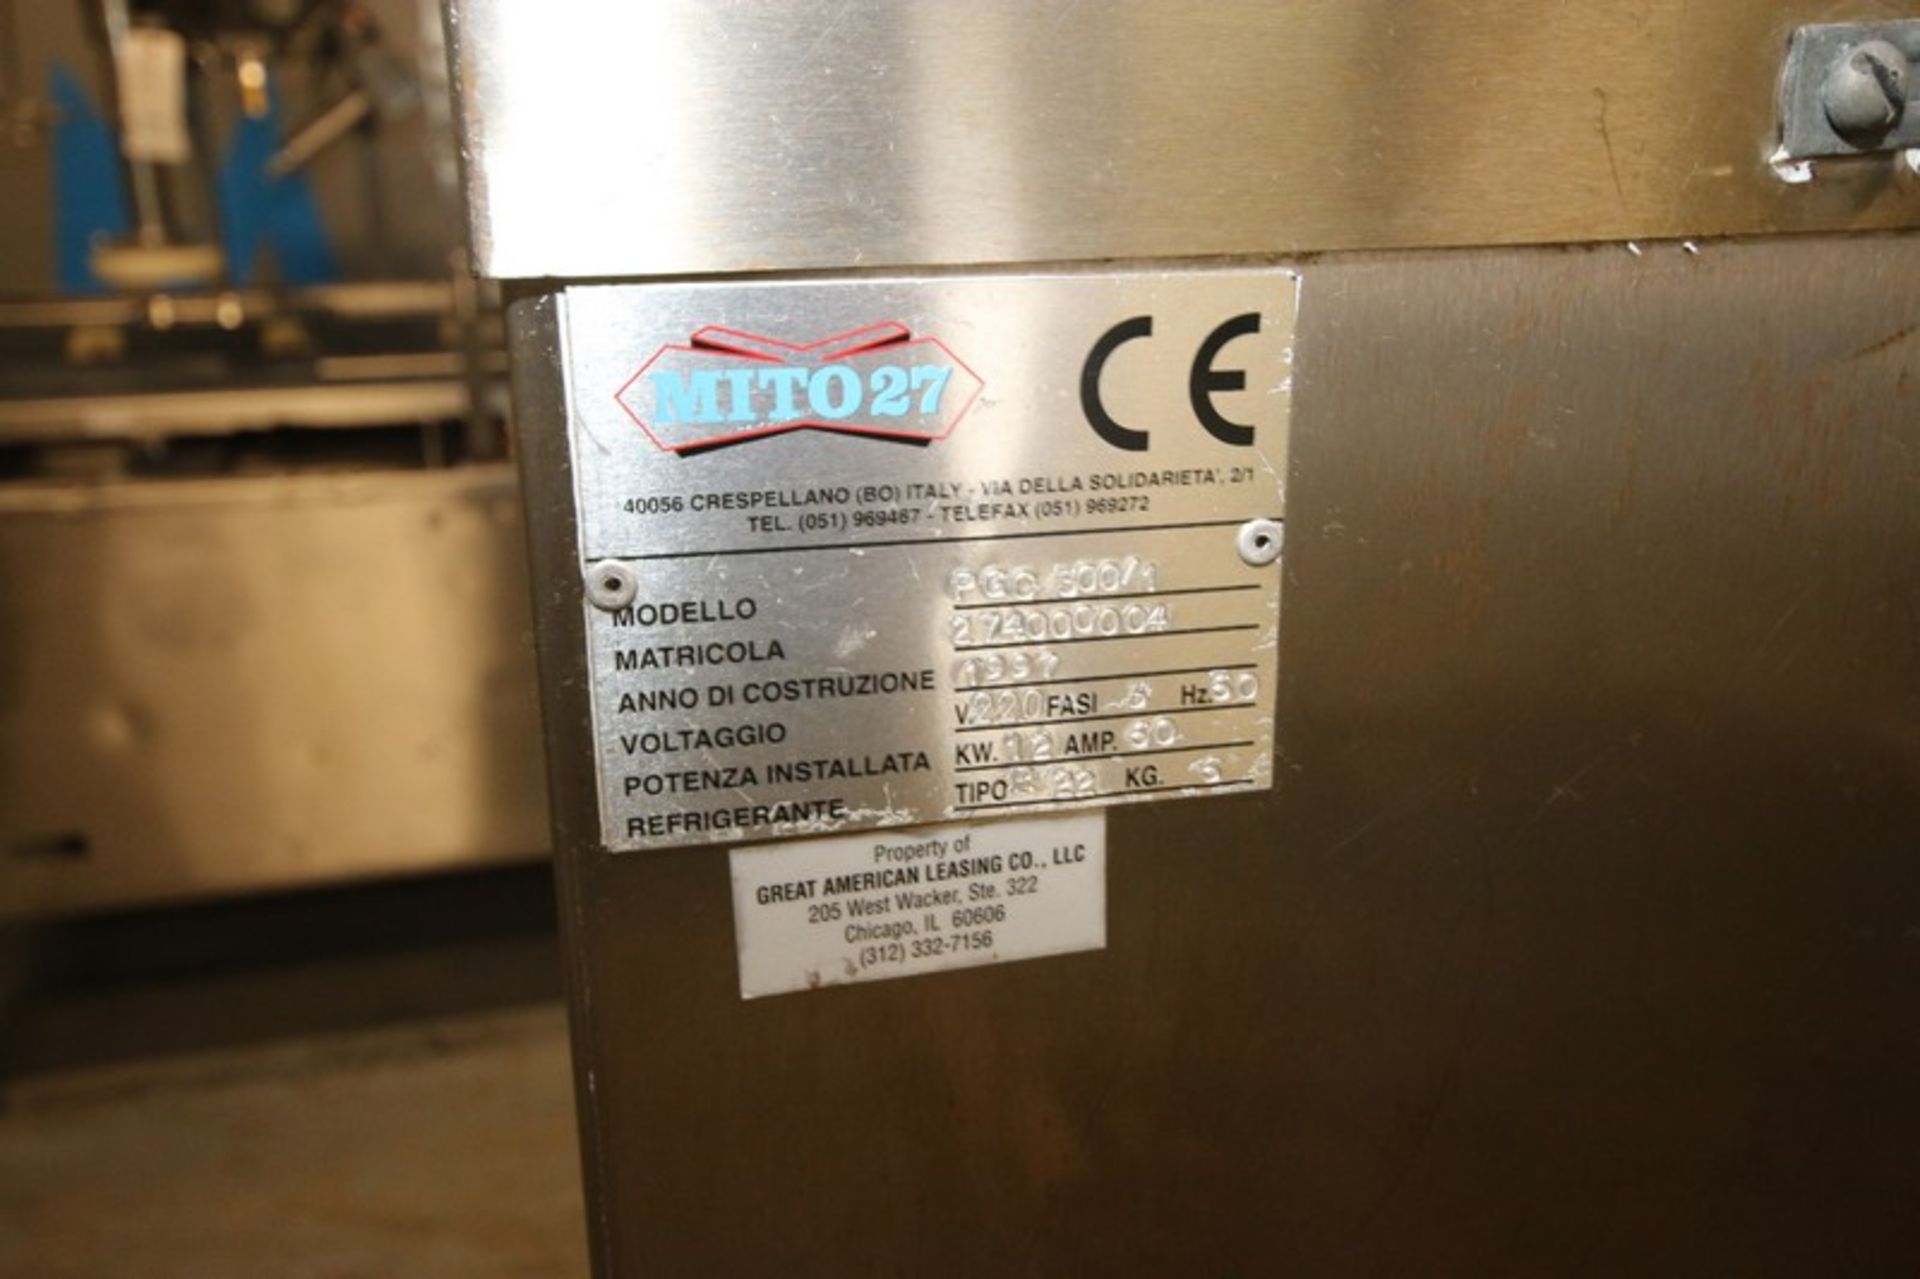 Catta Mito 27 S/S Continuous Ice Cream Freezer, Type PGC 300/1, S/N 274000004, 220 Volts, Overall - Image 6 of 6